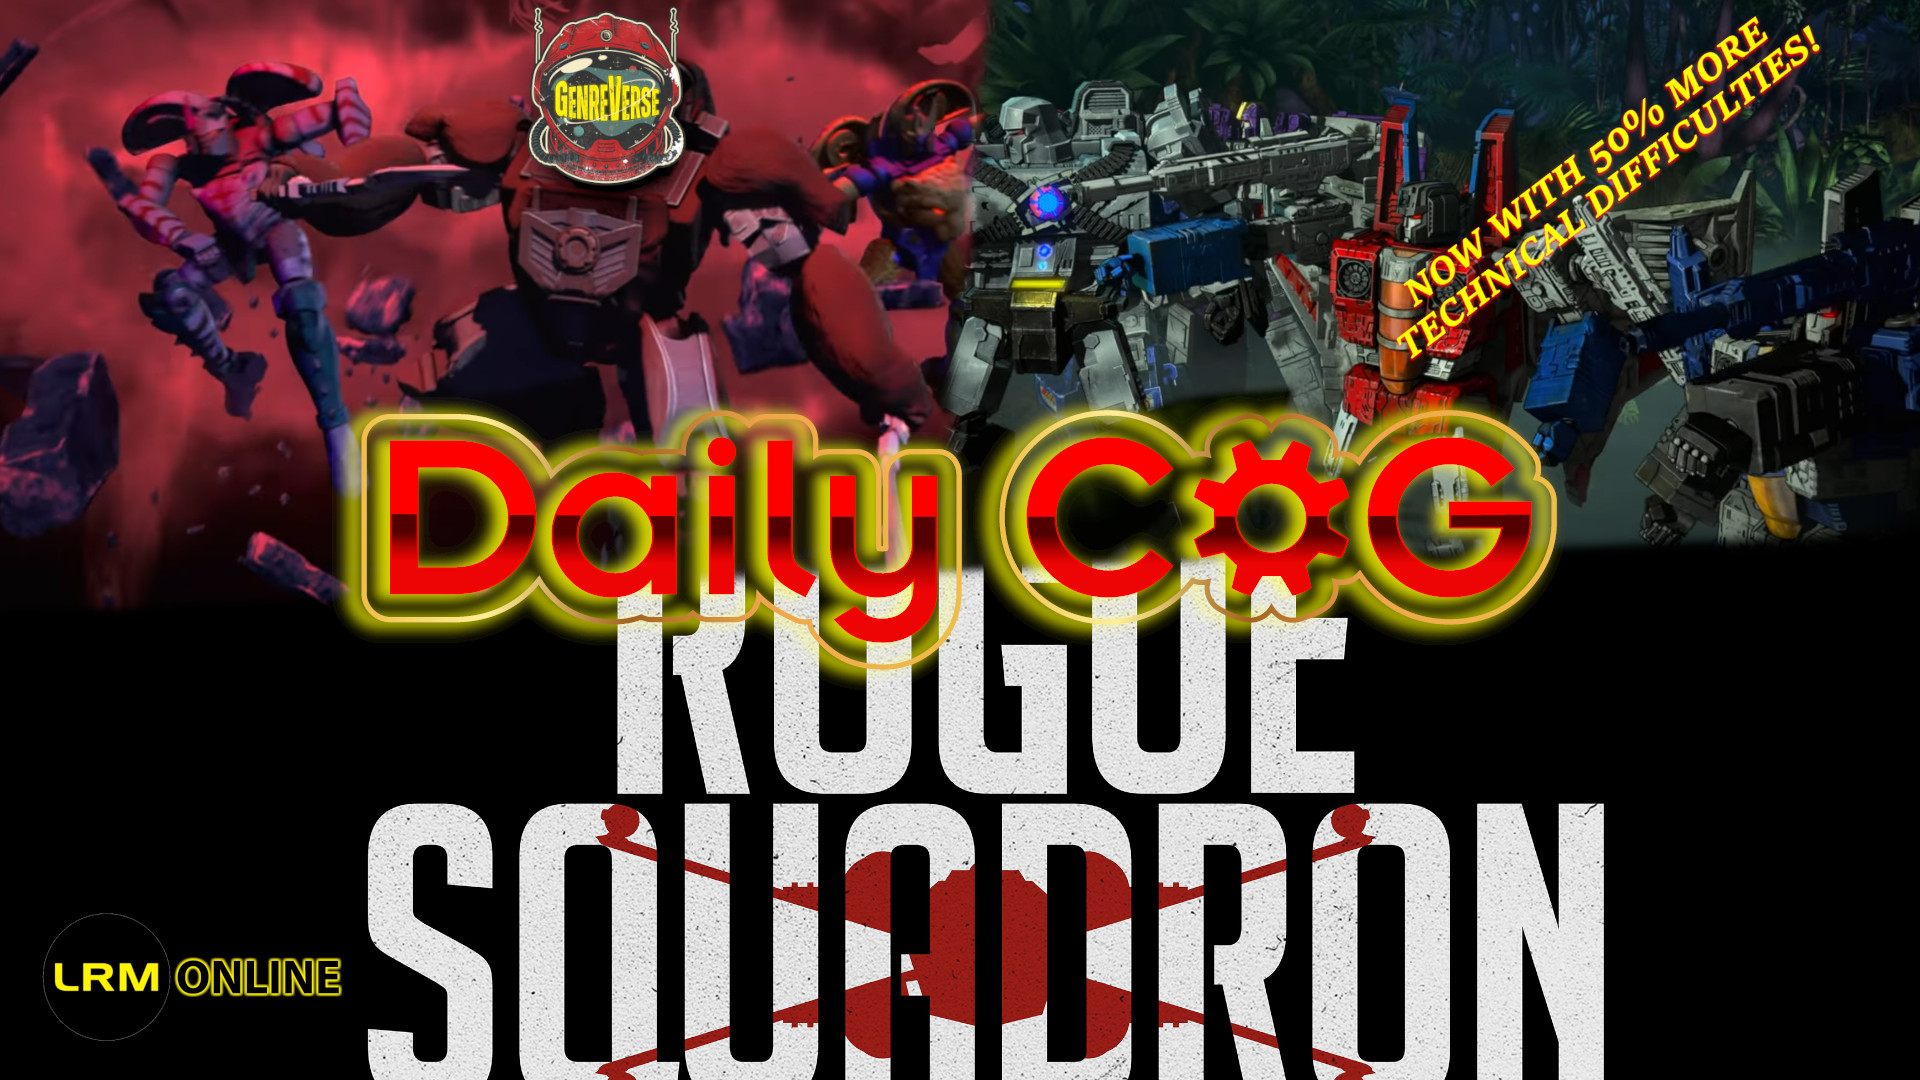 Transformers War For Cybertron Kingdom Trailer Reaction and Why Rogue Squadron Is In Trouble Daily Cog Daily Cup Of Genre 7-6-21b